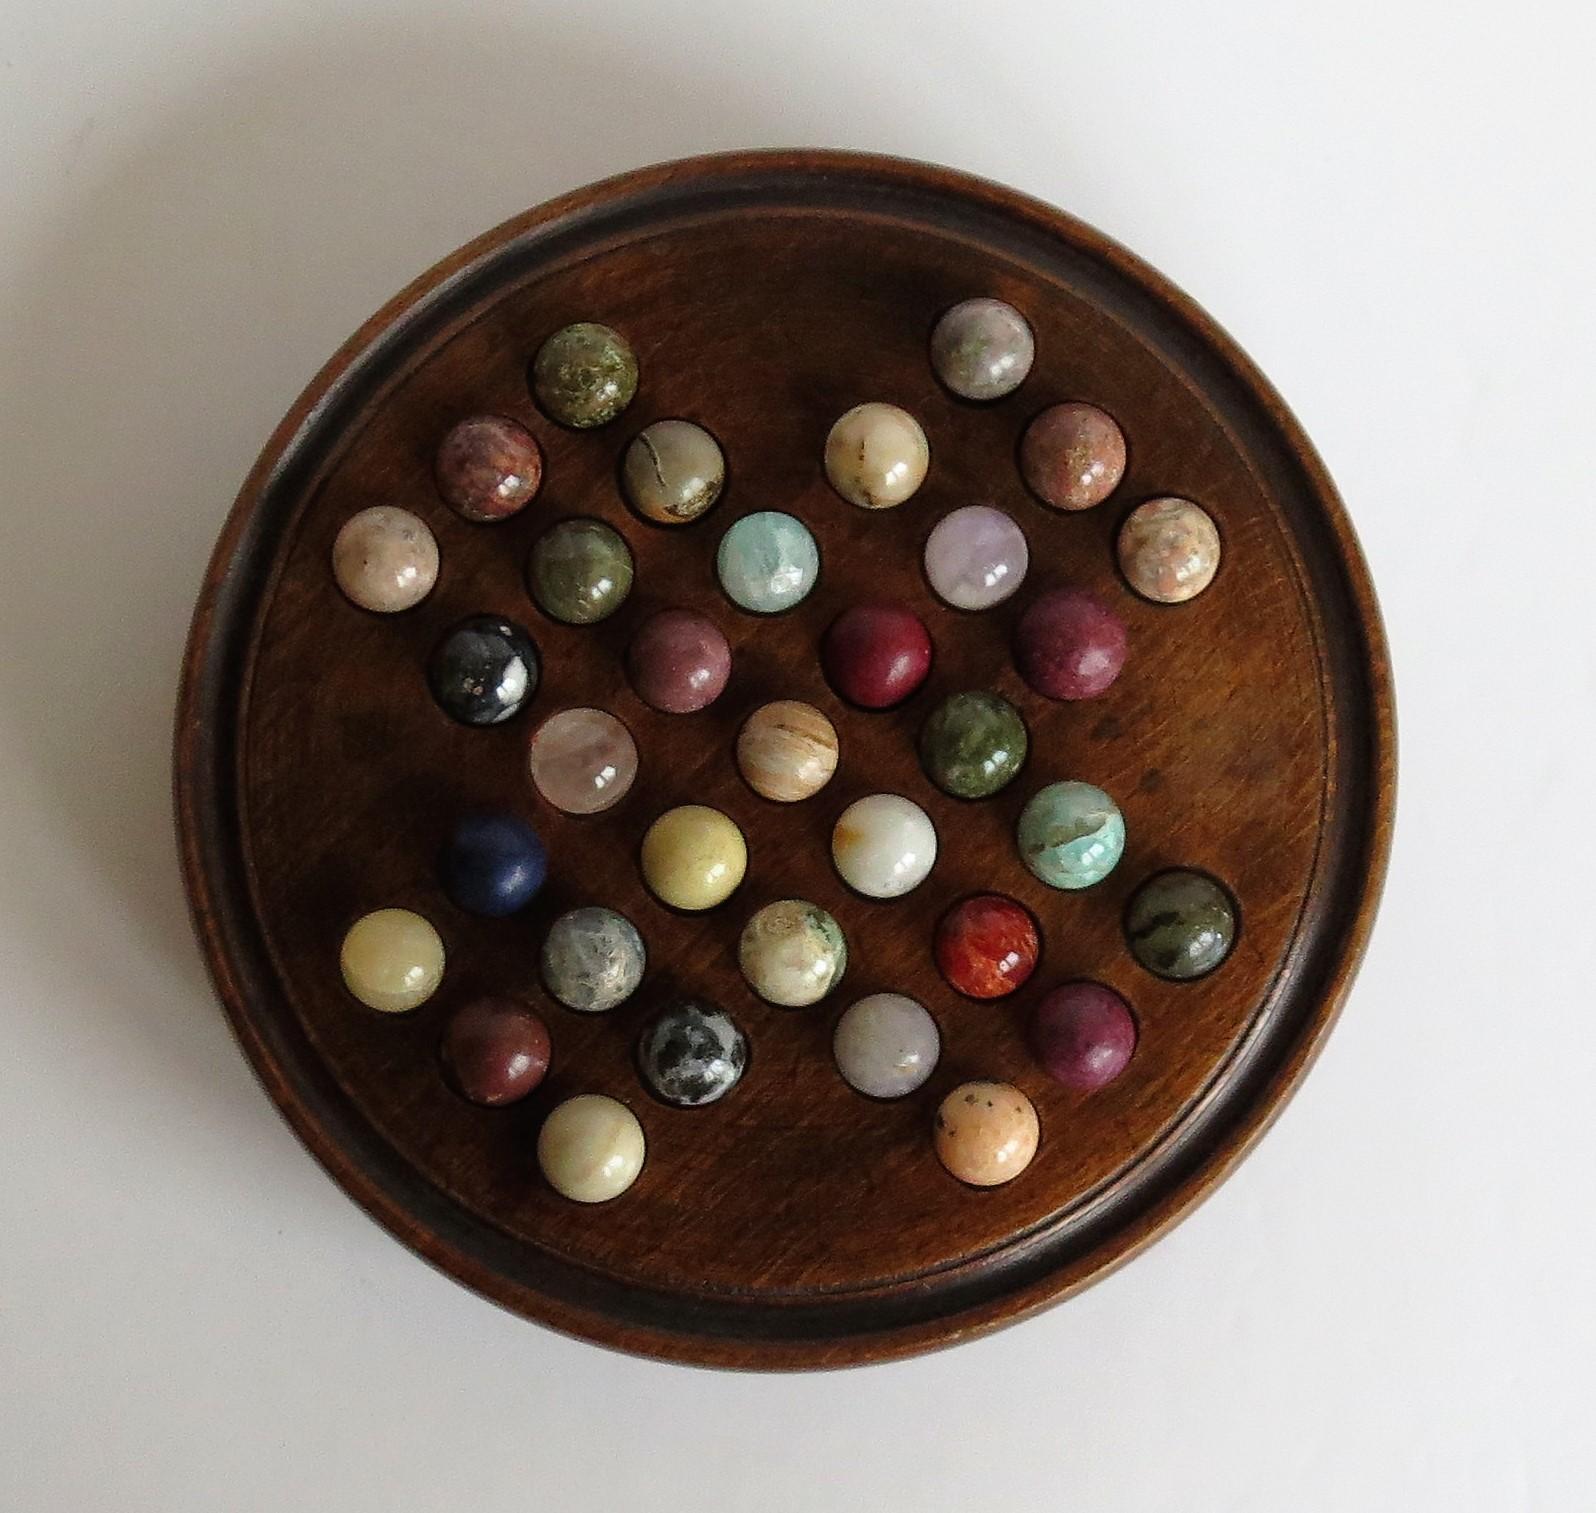 This is a very attractive complete game of travelling marble solitaire with 33 beautiful agate mineral stone marbles, from the late 19th century.

This two-piece board has a fairly small diameter of less than 6 inches and is unusual in that it has